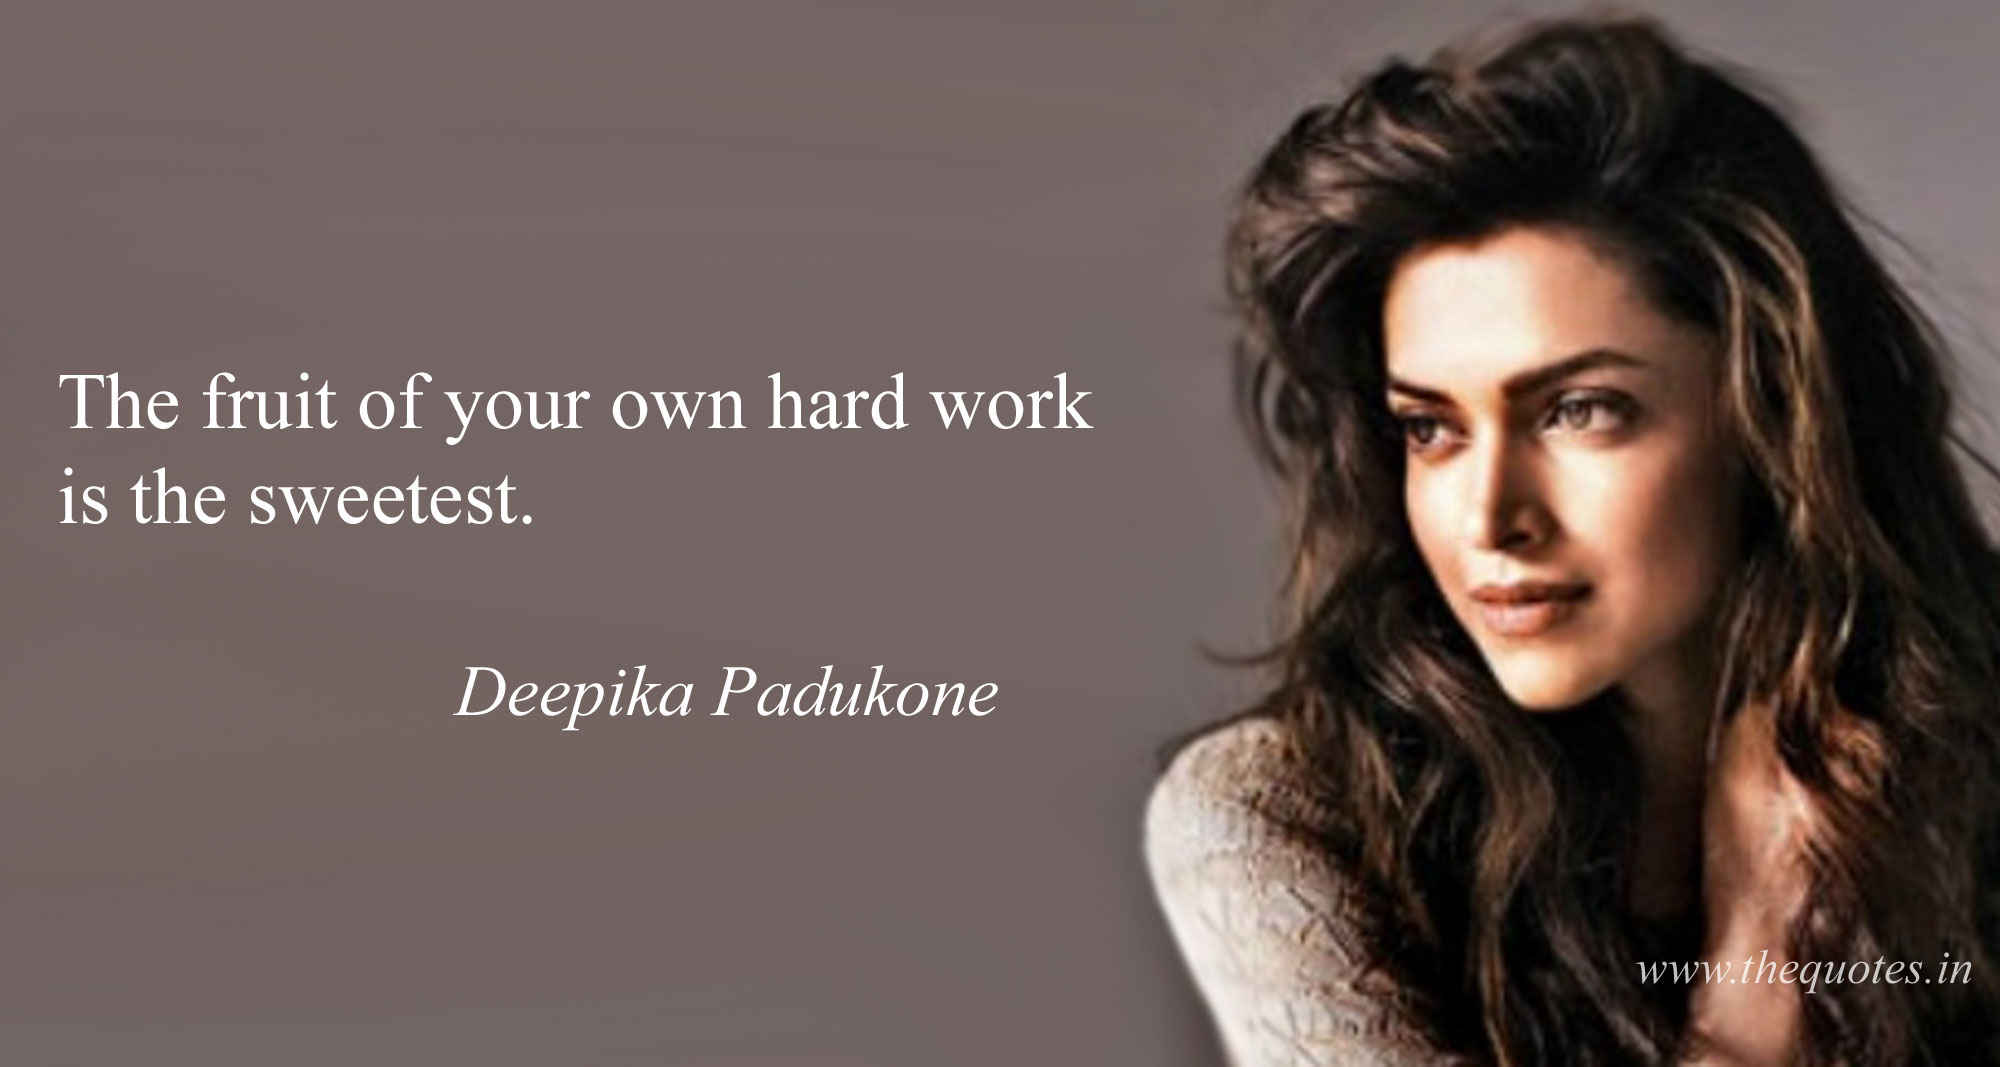 Clever Quotes From Indian Celebrities 